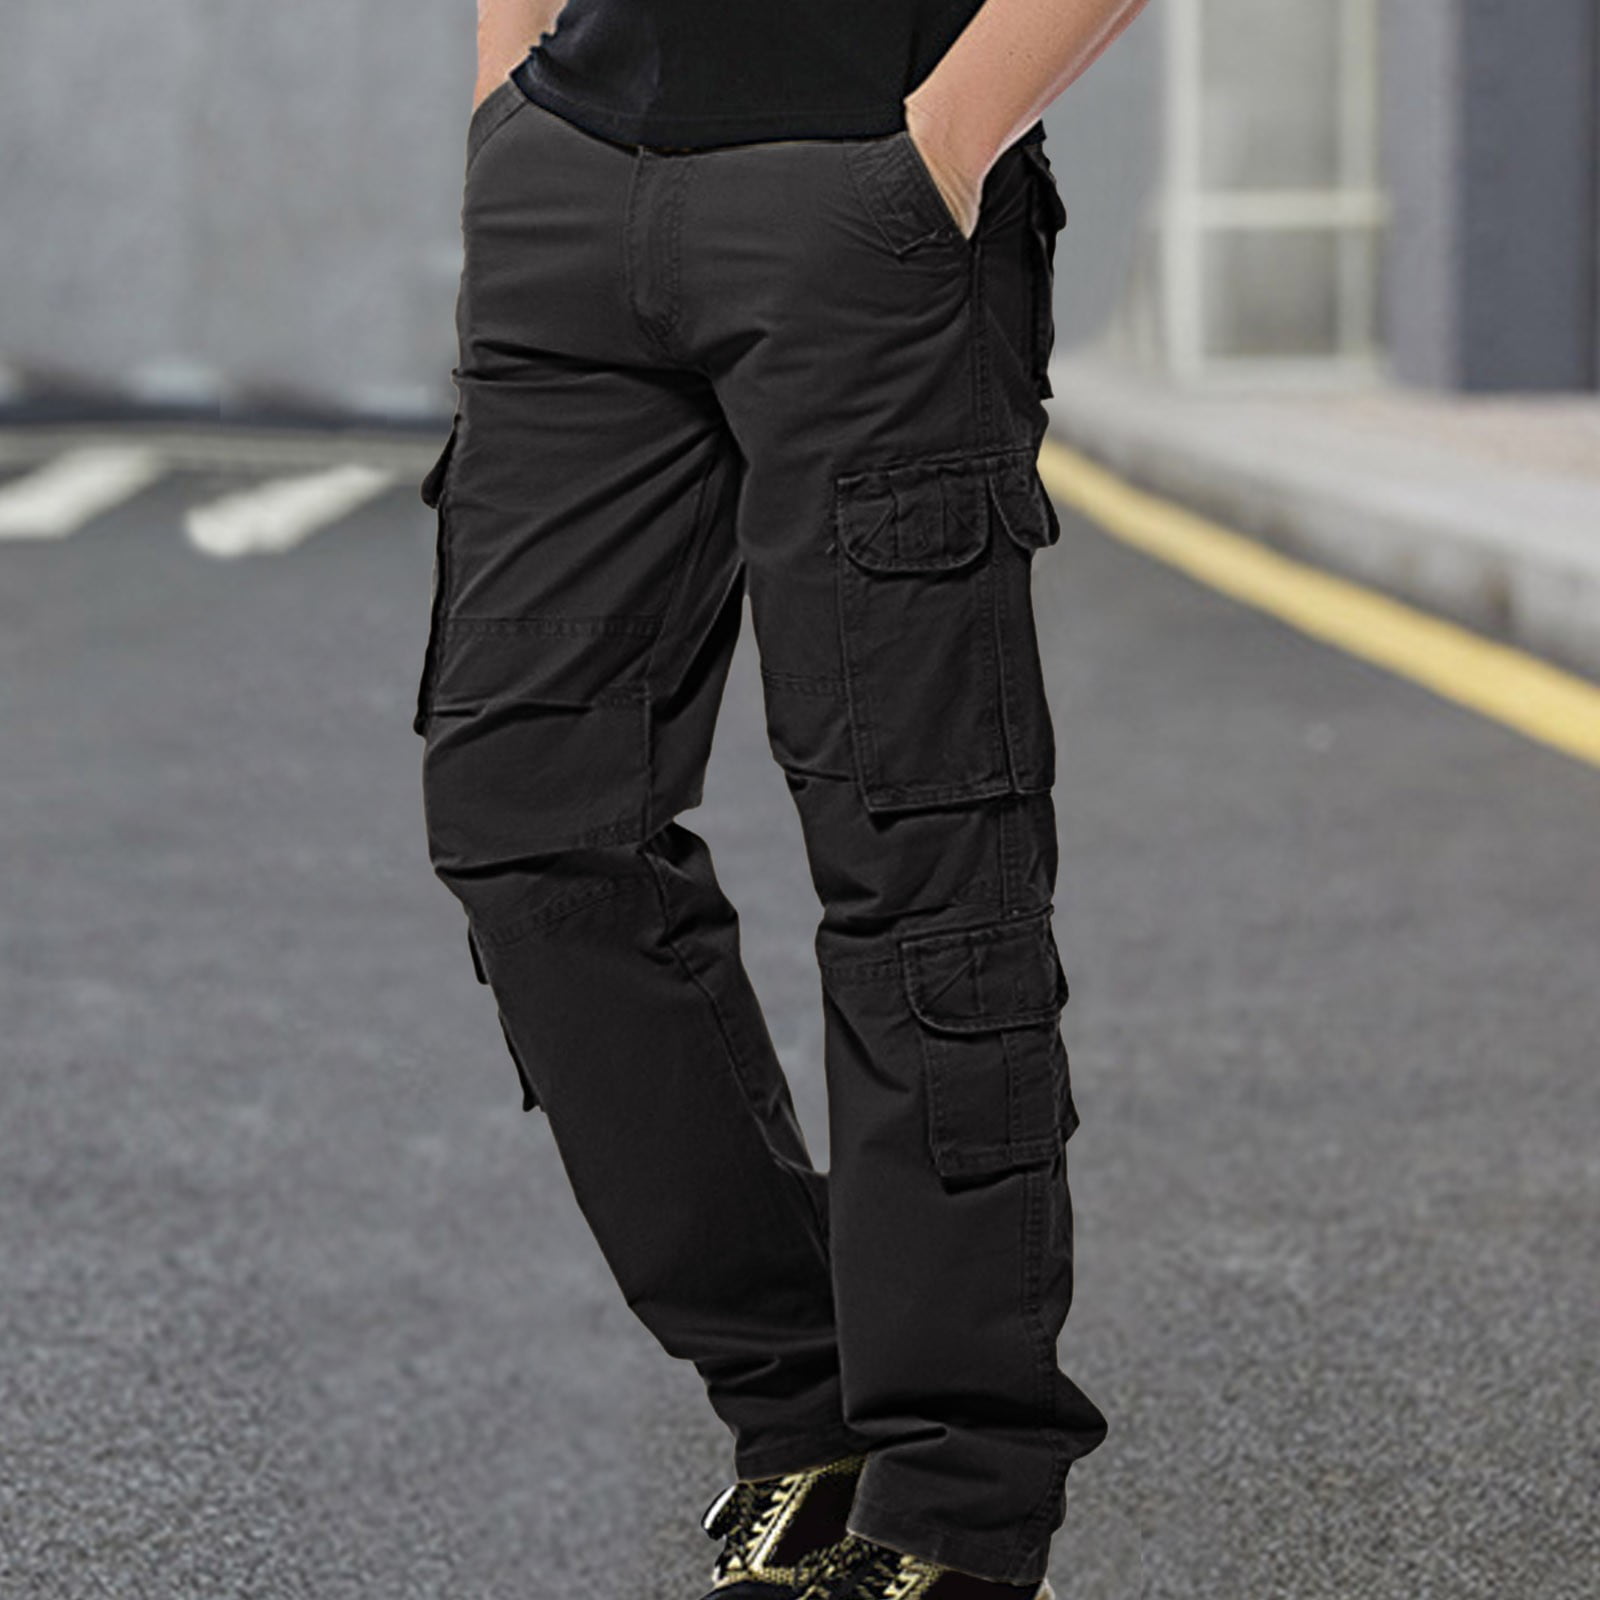 Men Thermal Plain Front Dress Pants Classic Winter Fleece Lined Insulated Pants  for Travelling Golf Business 